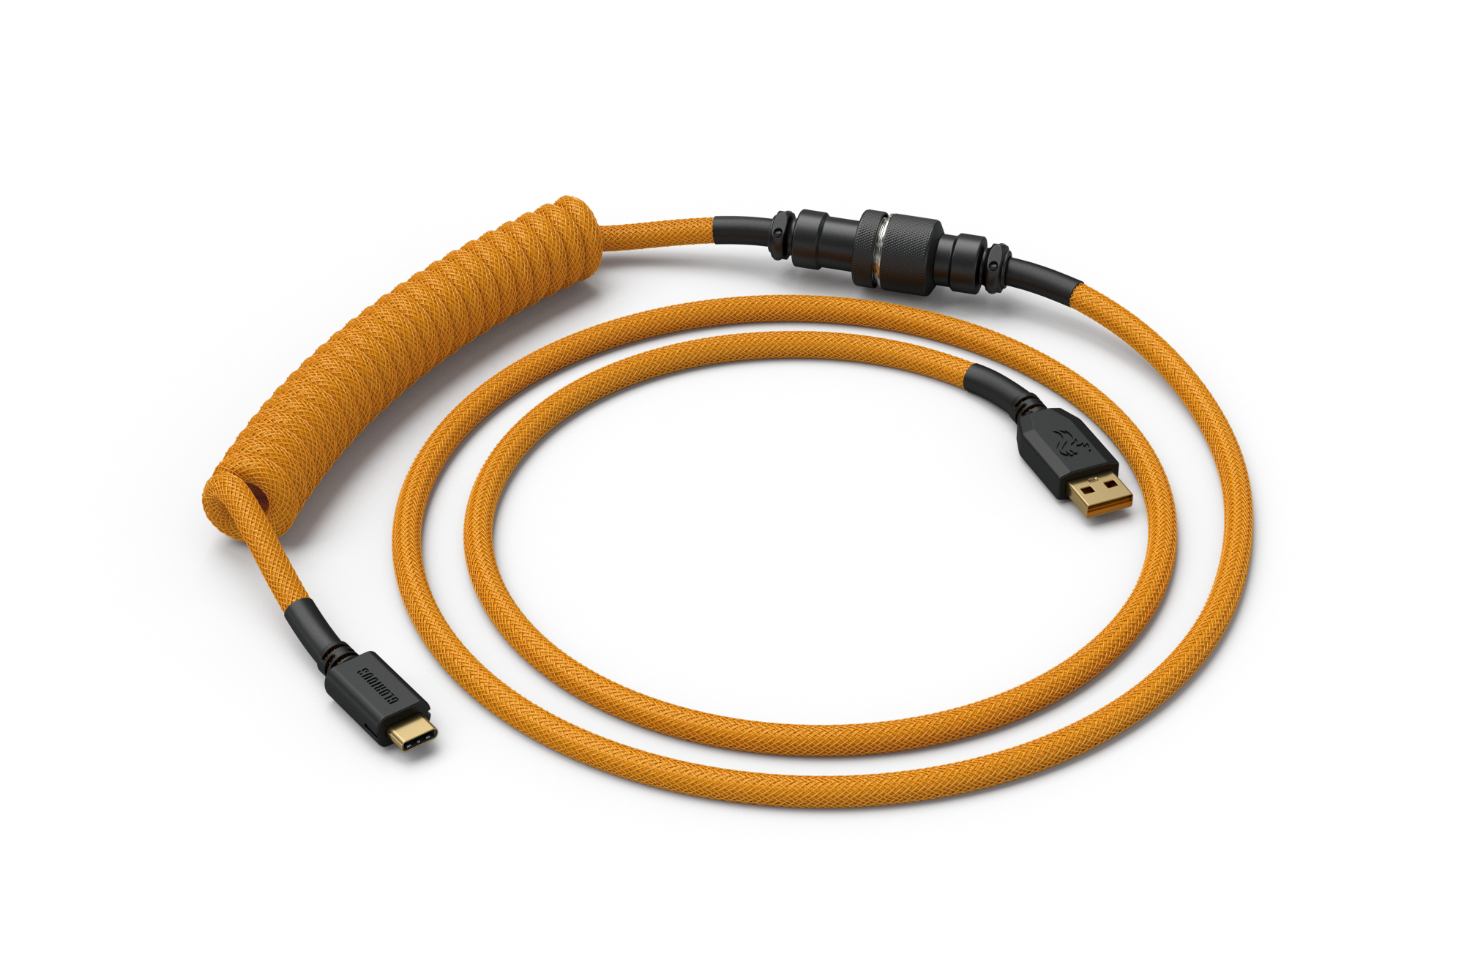 GLO-CBL-COIL-GG GLORIOUS PC GAMING RACE Coiled Cable USB-C to USB-A  Glorious Yellow (GLO-CBL-COIL-GG)